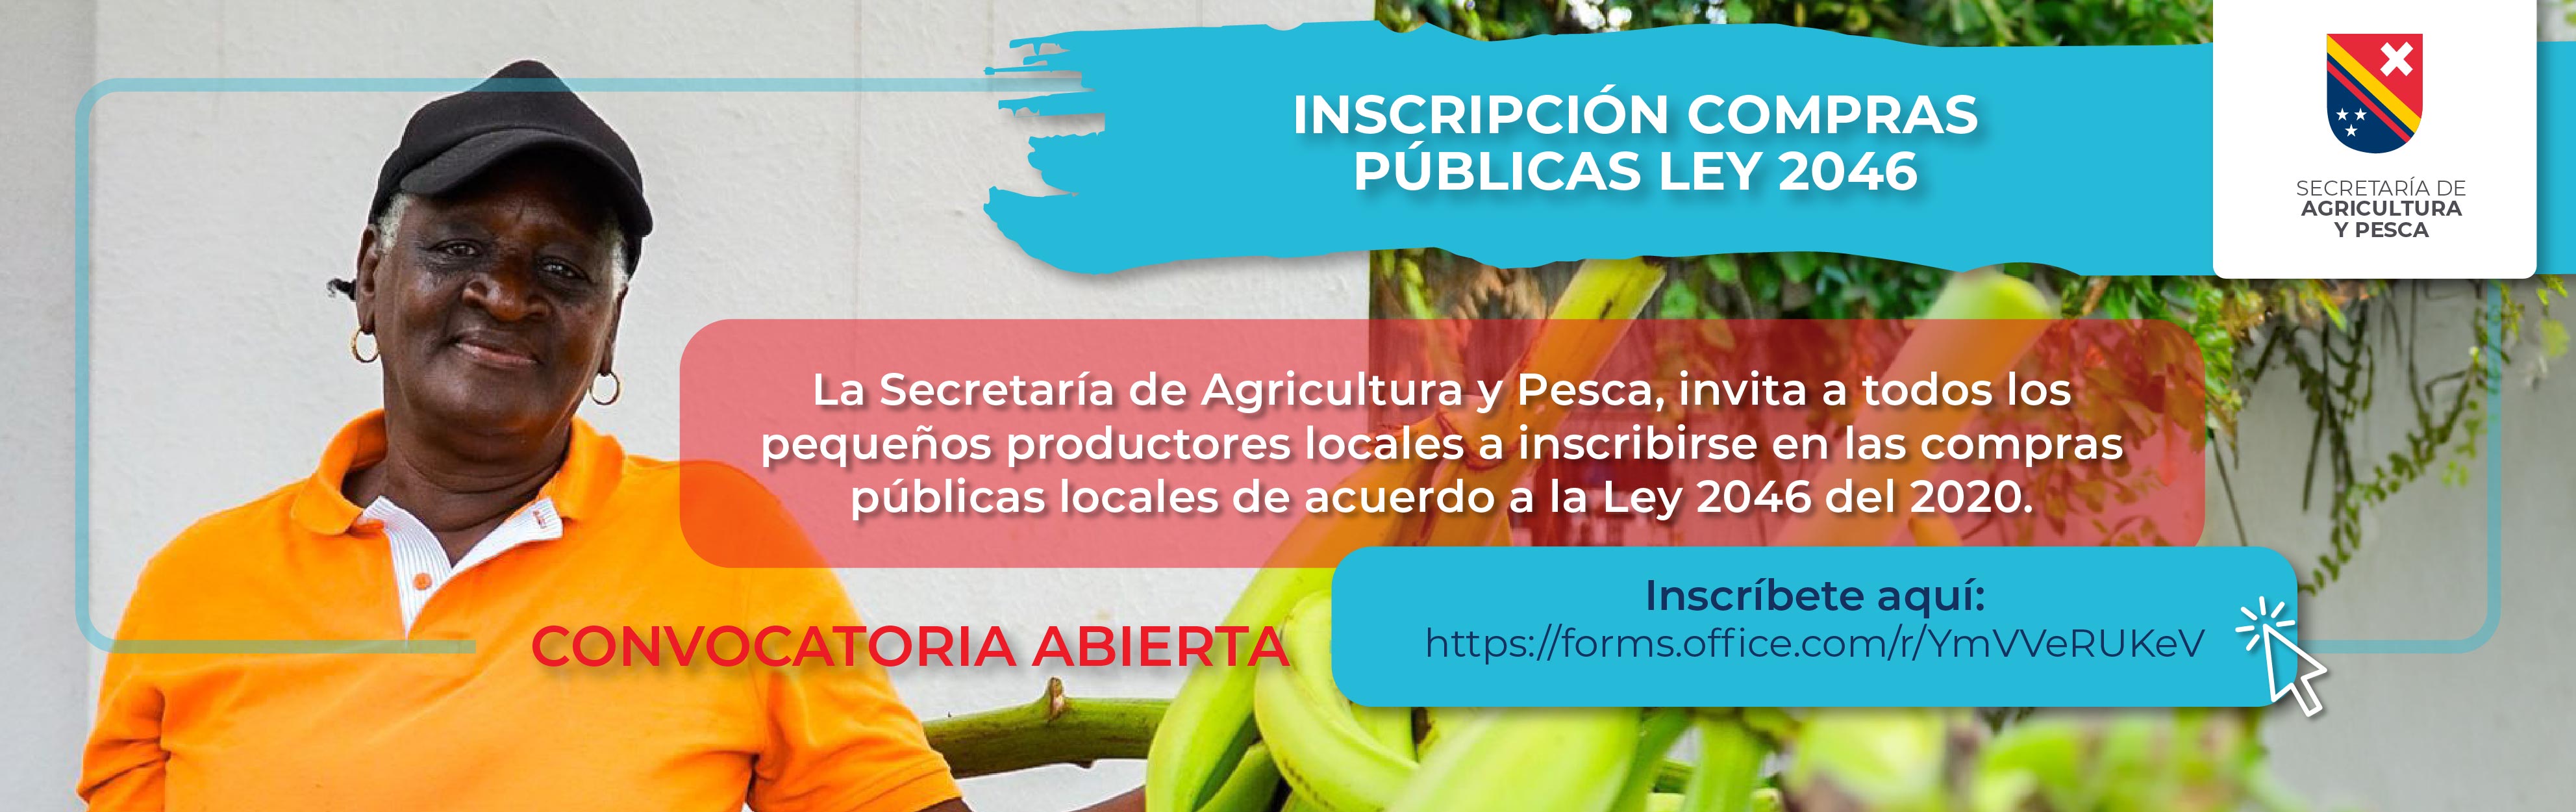 AGRICULTURA BANNER